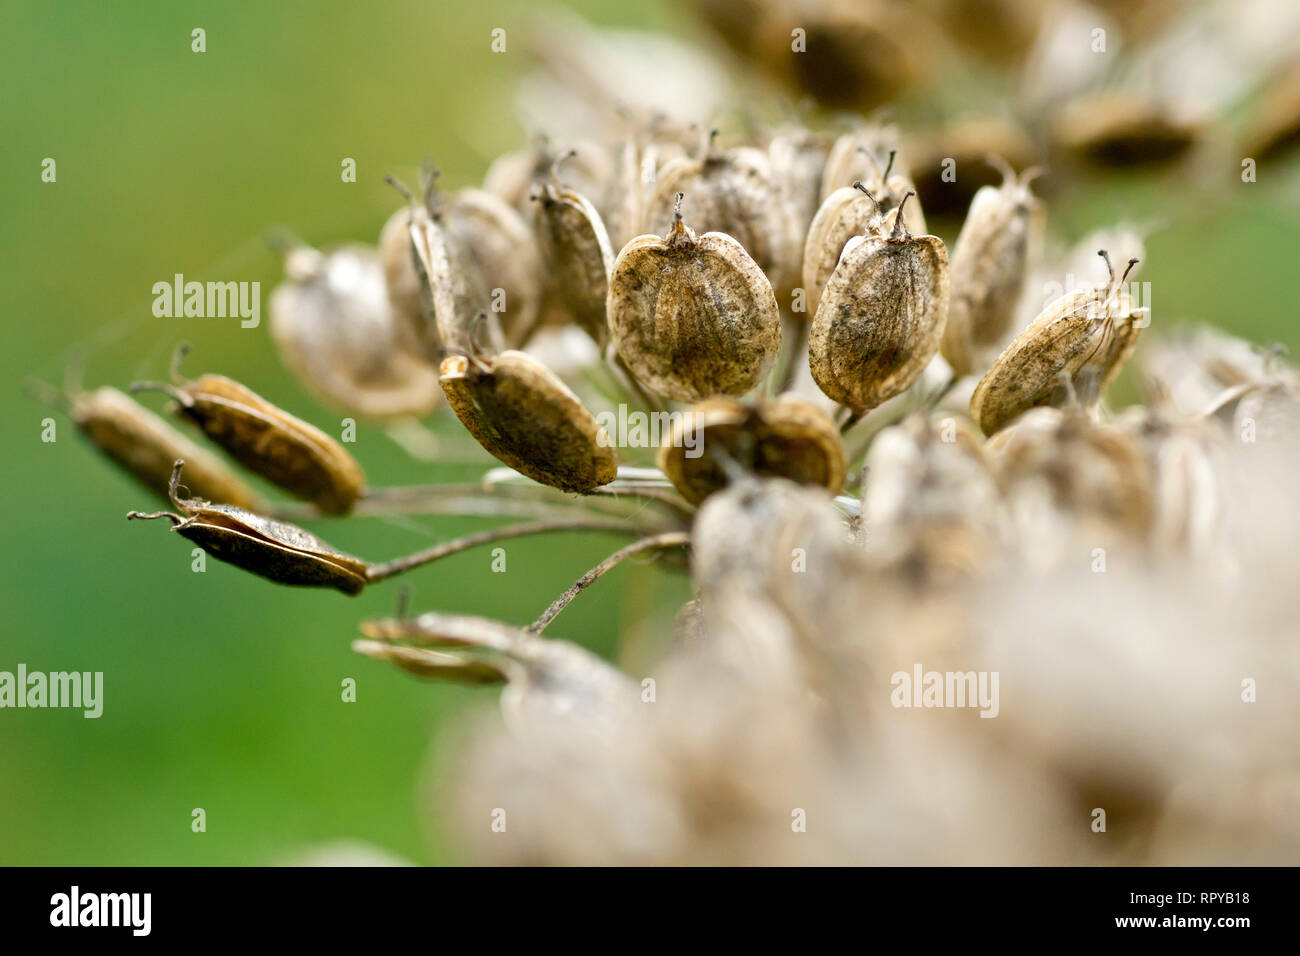 Hogweed or Cow Parsnip (heracleum sphondylium), close up of a group of seed pods beginning to split open and release their seeds. Stock Photo